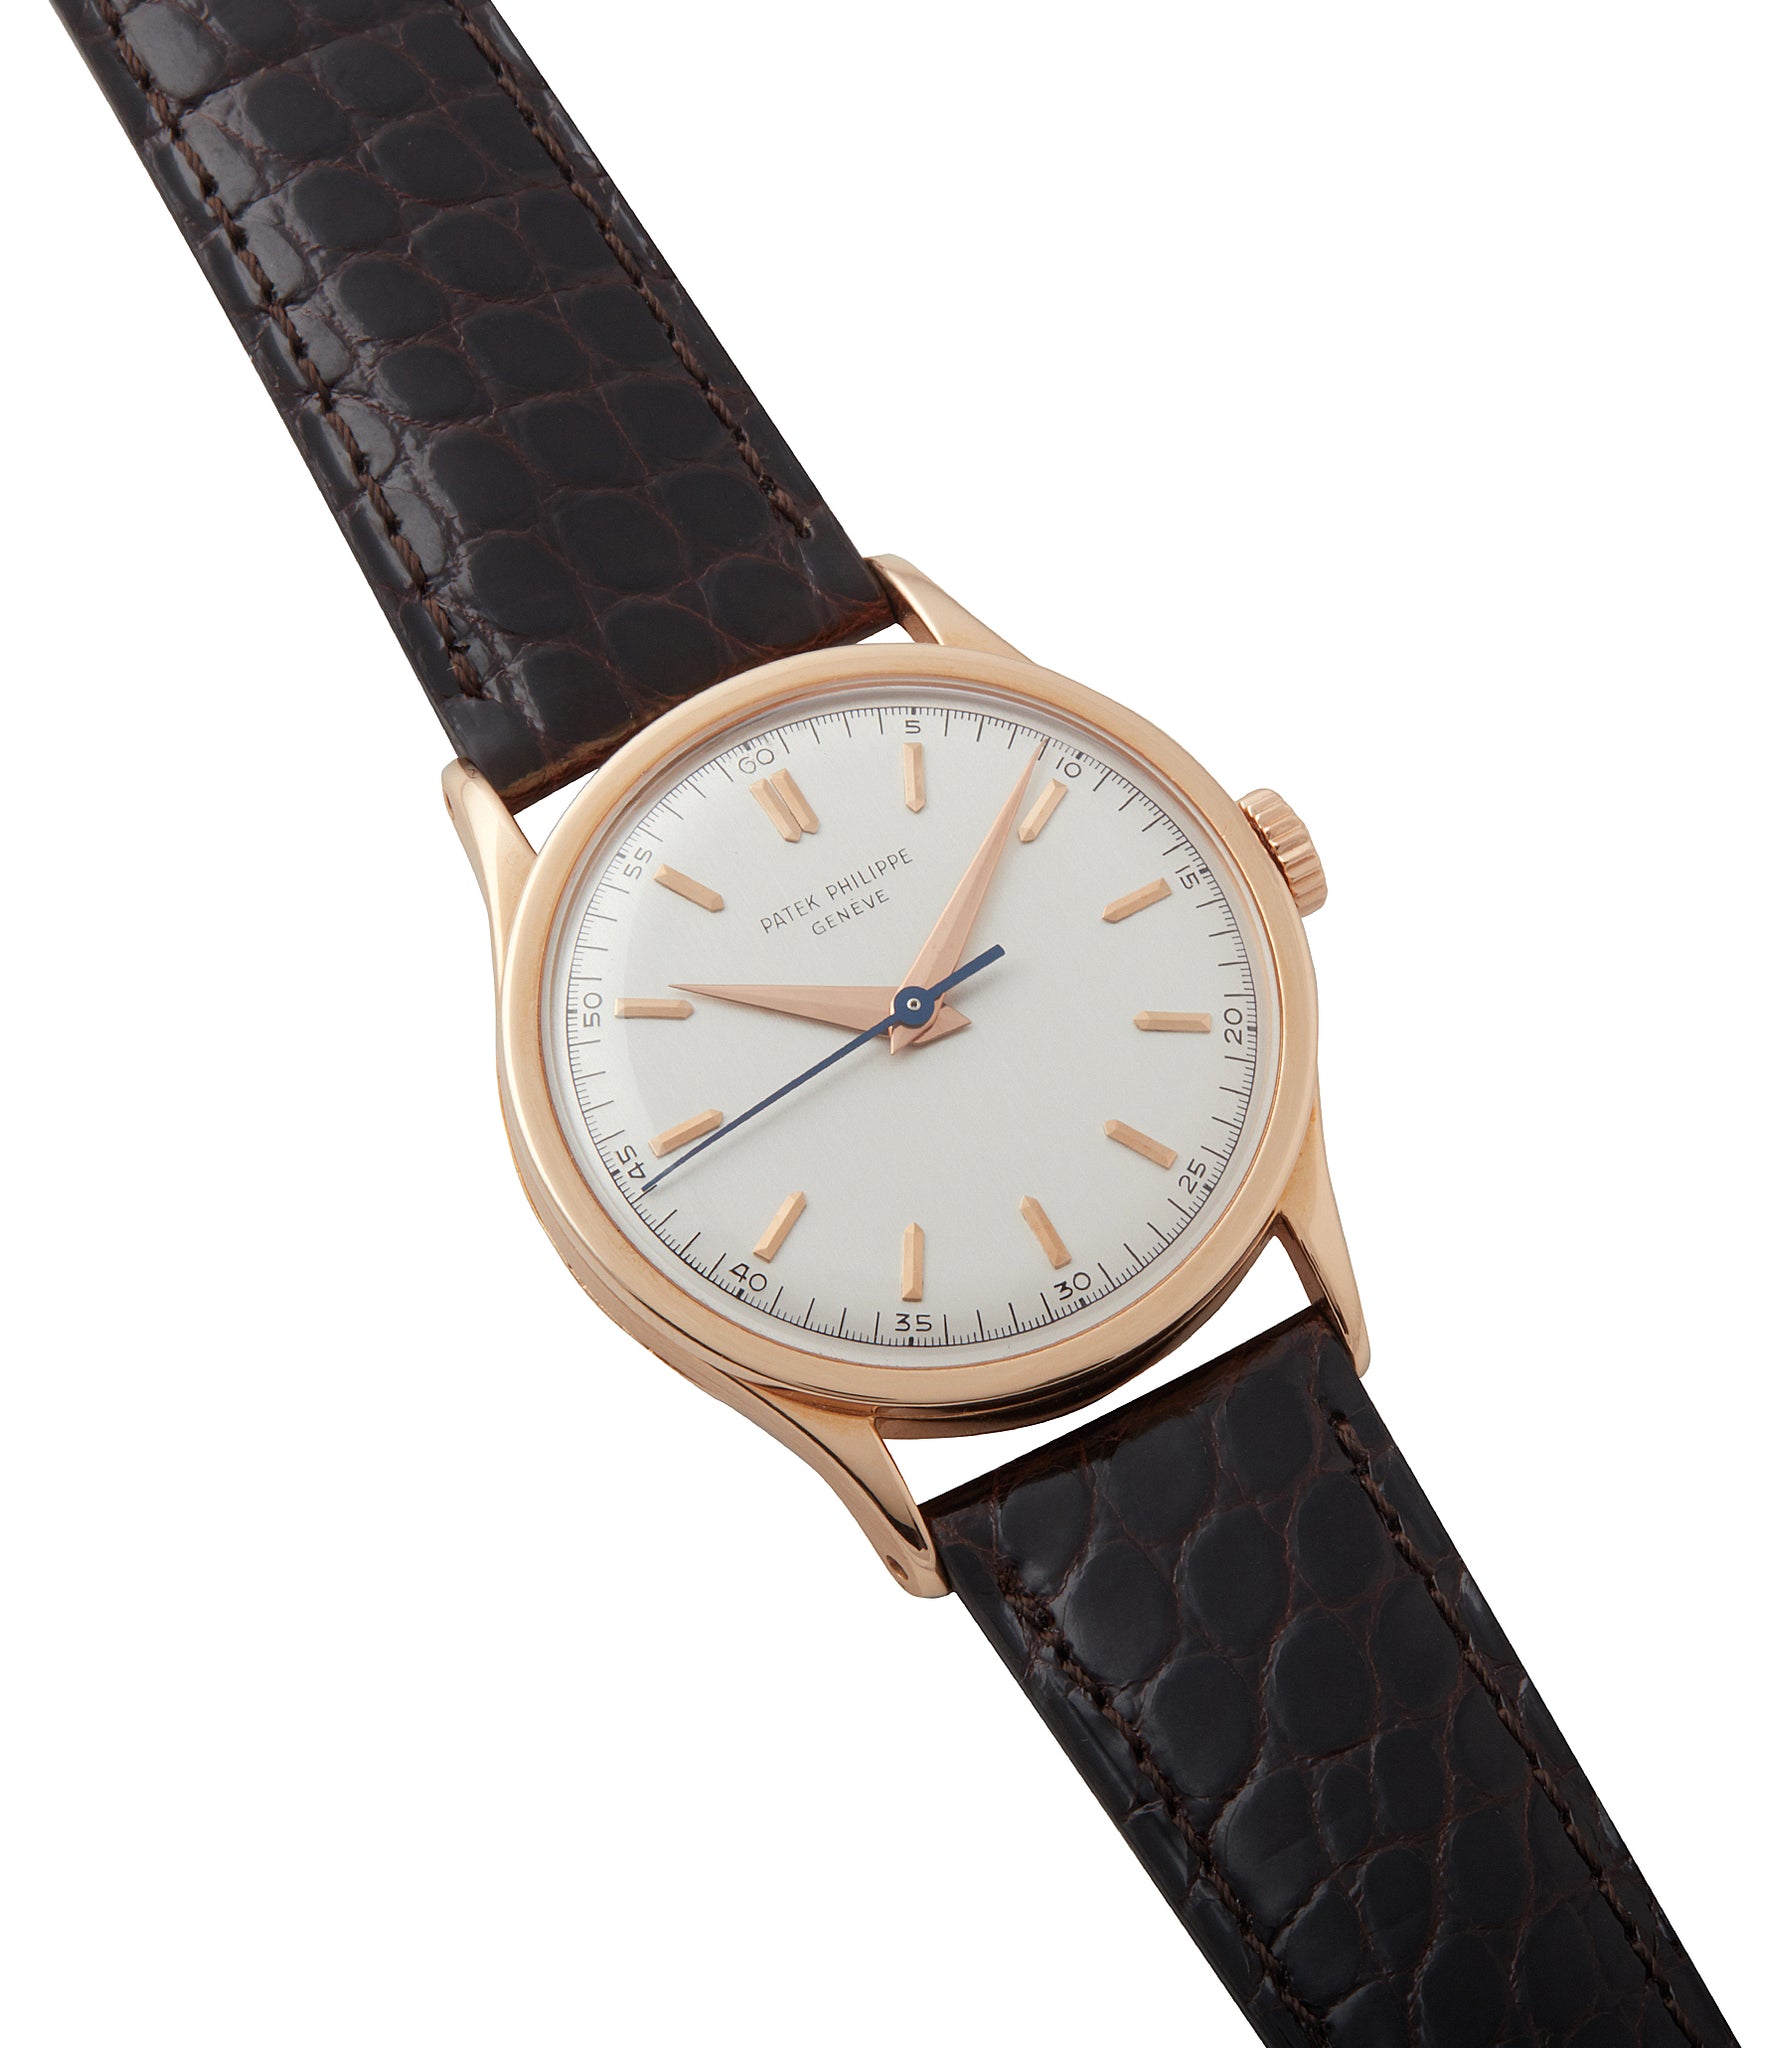 buy 570R-SCI vintage Patek Philippe time-only rose gold dress watch with Archive Extracts for sale online at A Collected Man London UK specialist of rare watches